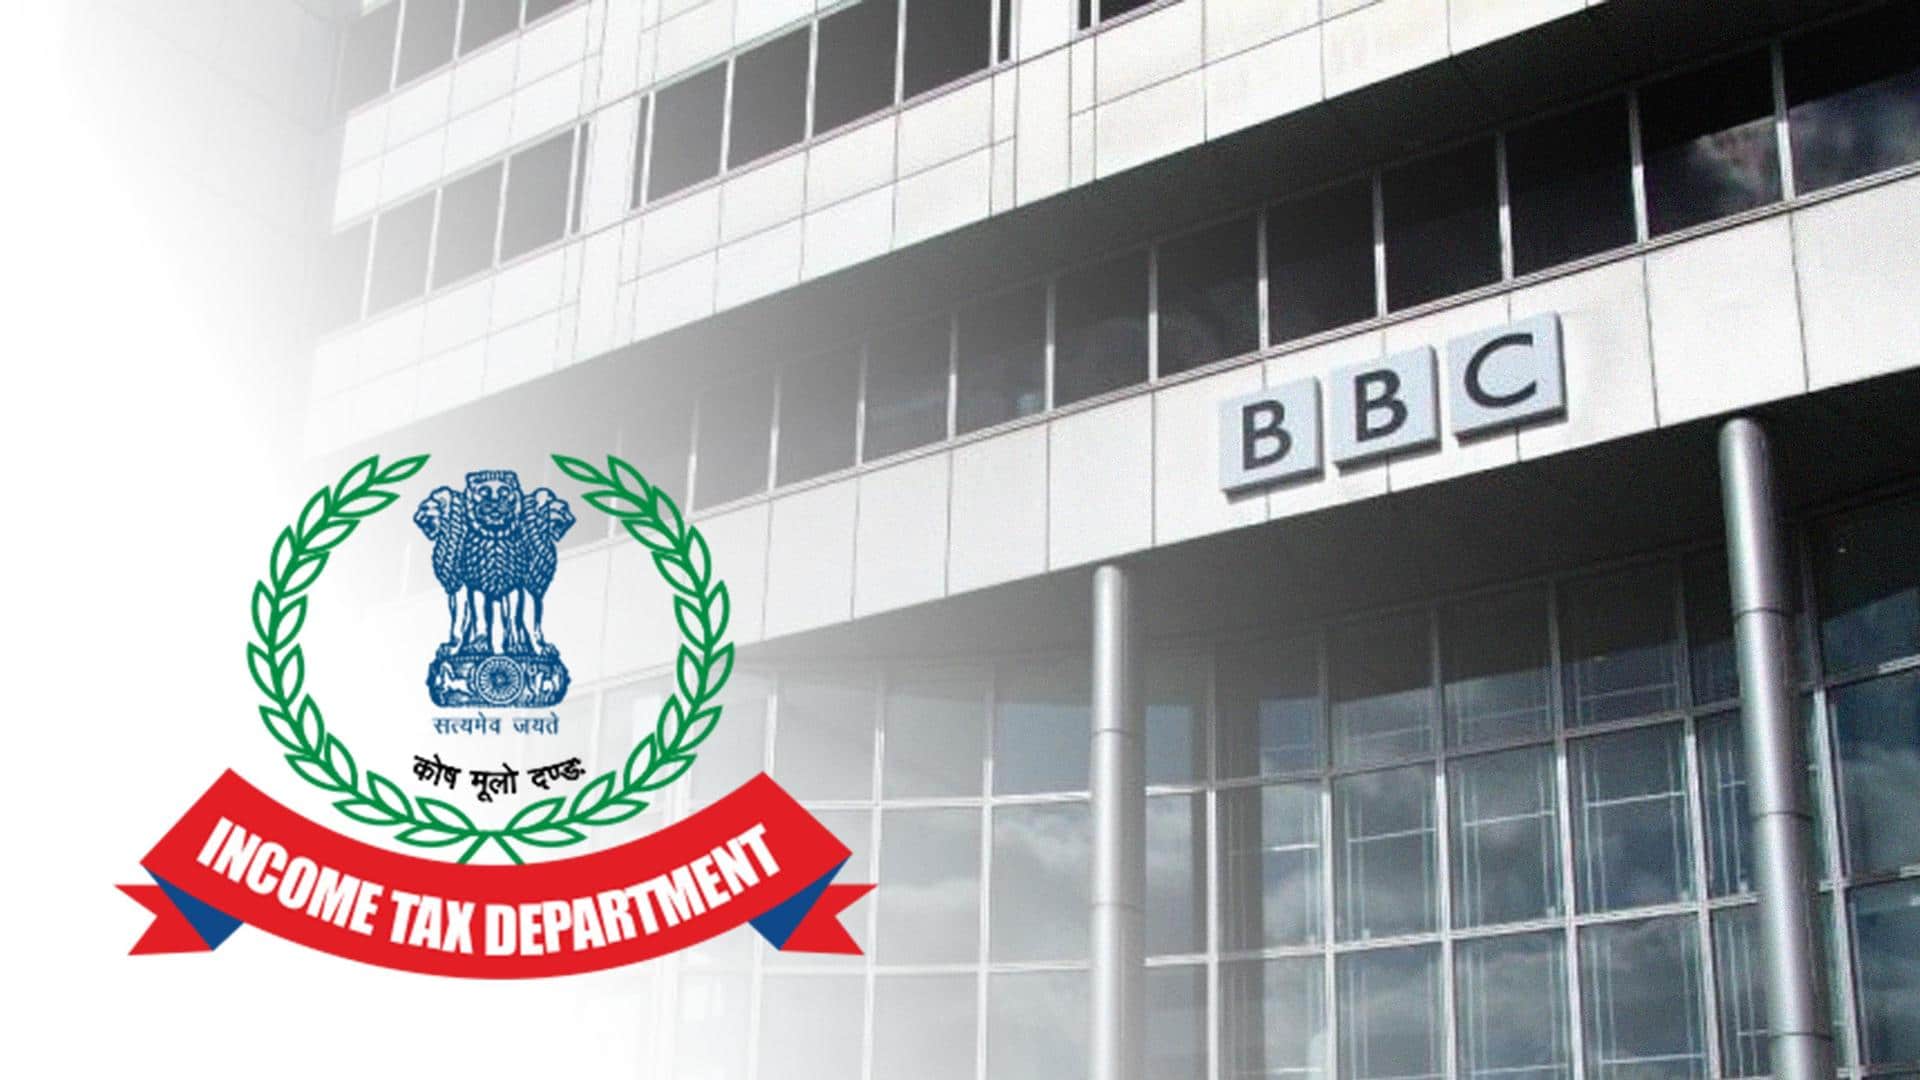 Day 3: I-T Department questioned BBC over financial transactions, subsidiaries 